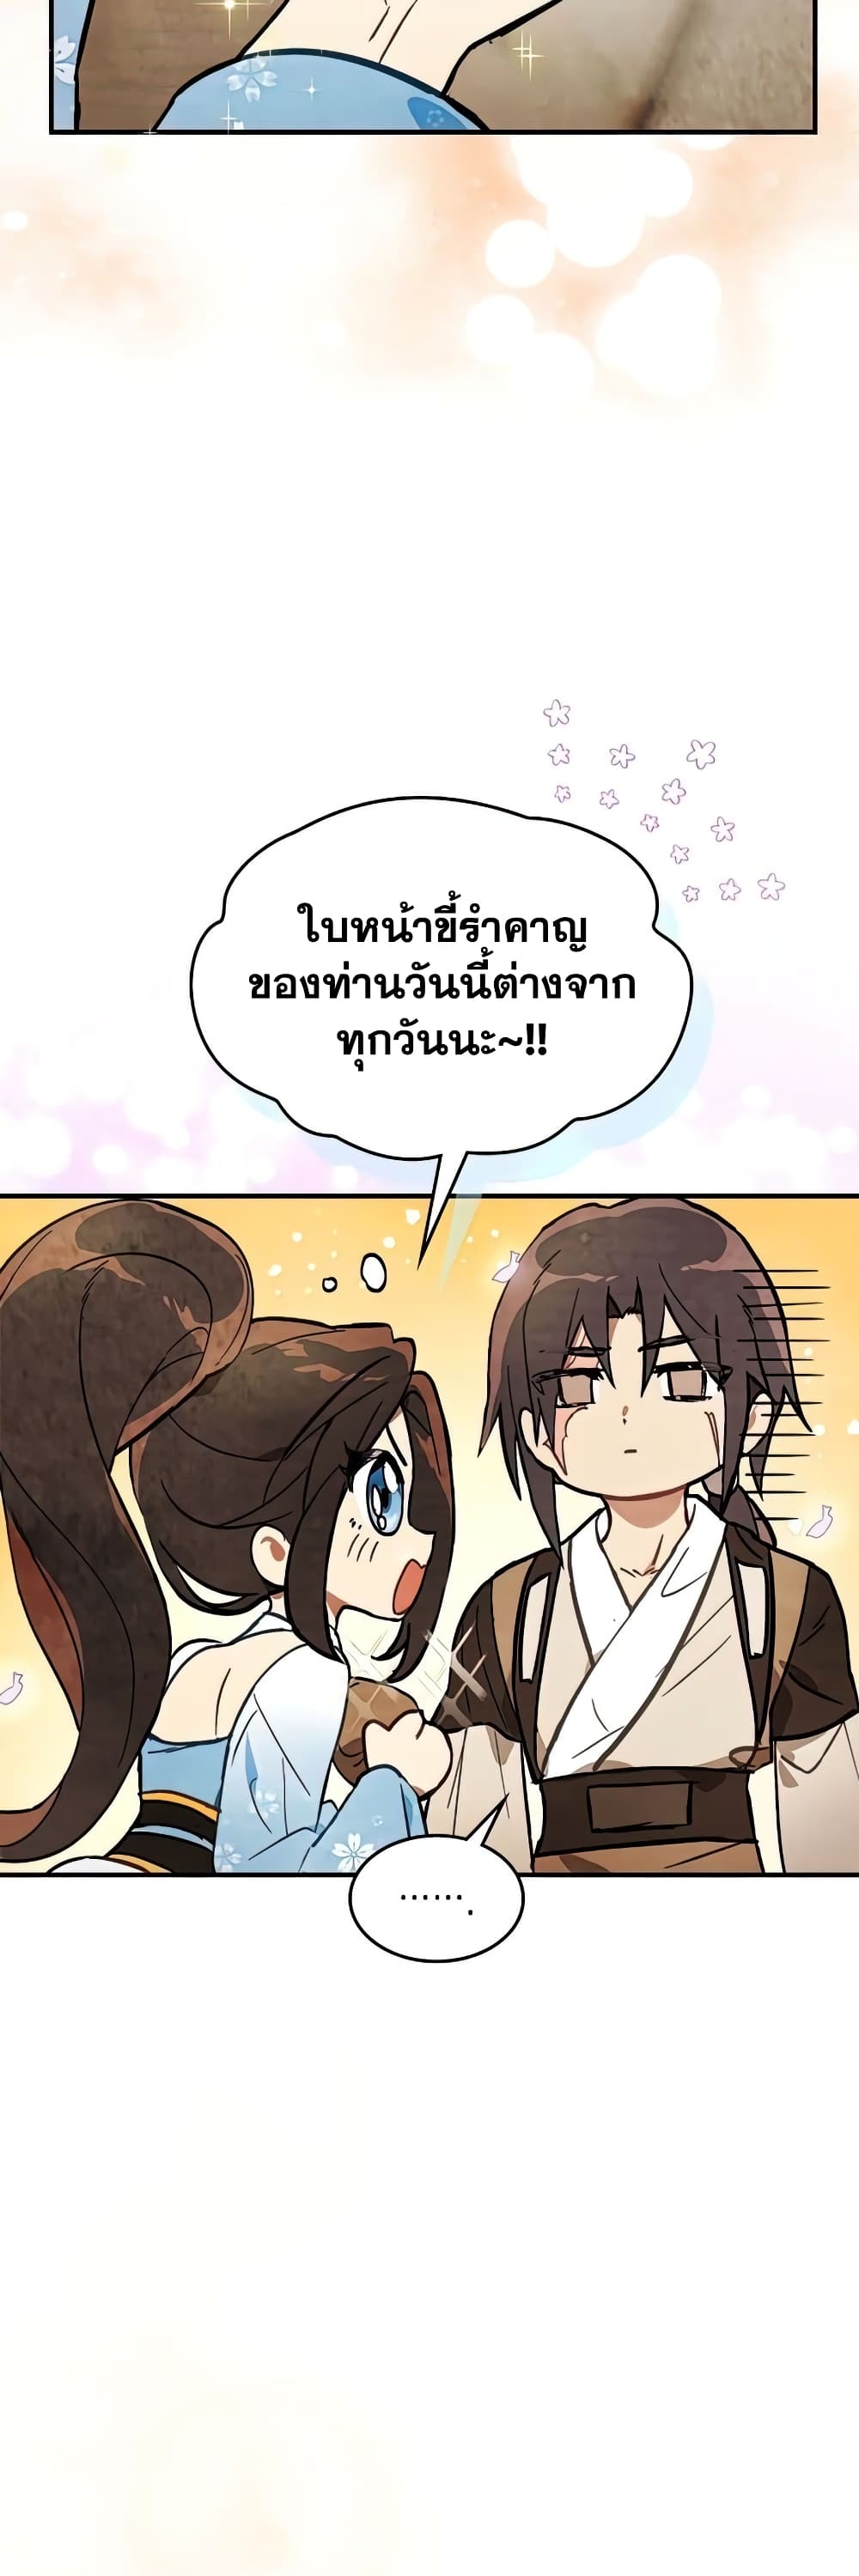 Chronicles Of The Martial God’s Return ตอนที่ 23 (5)